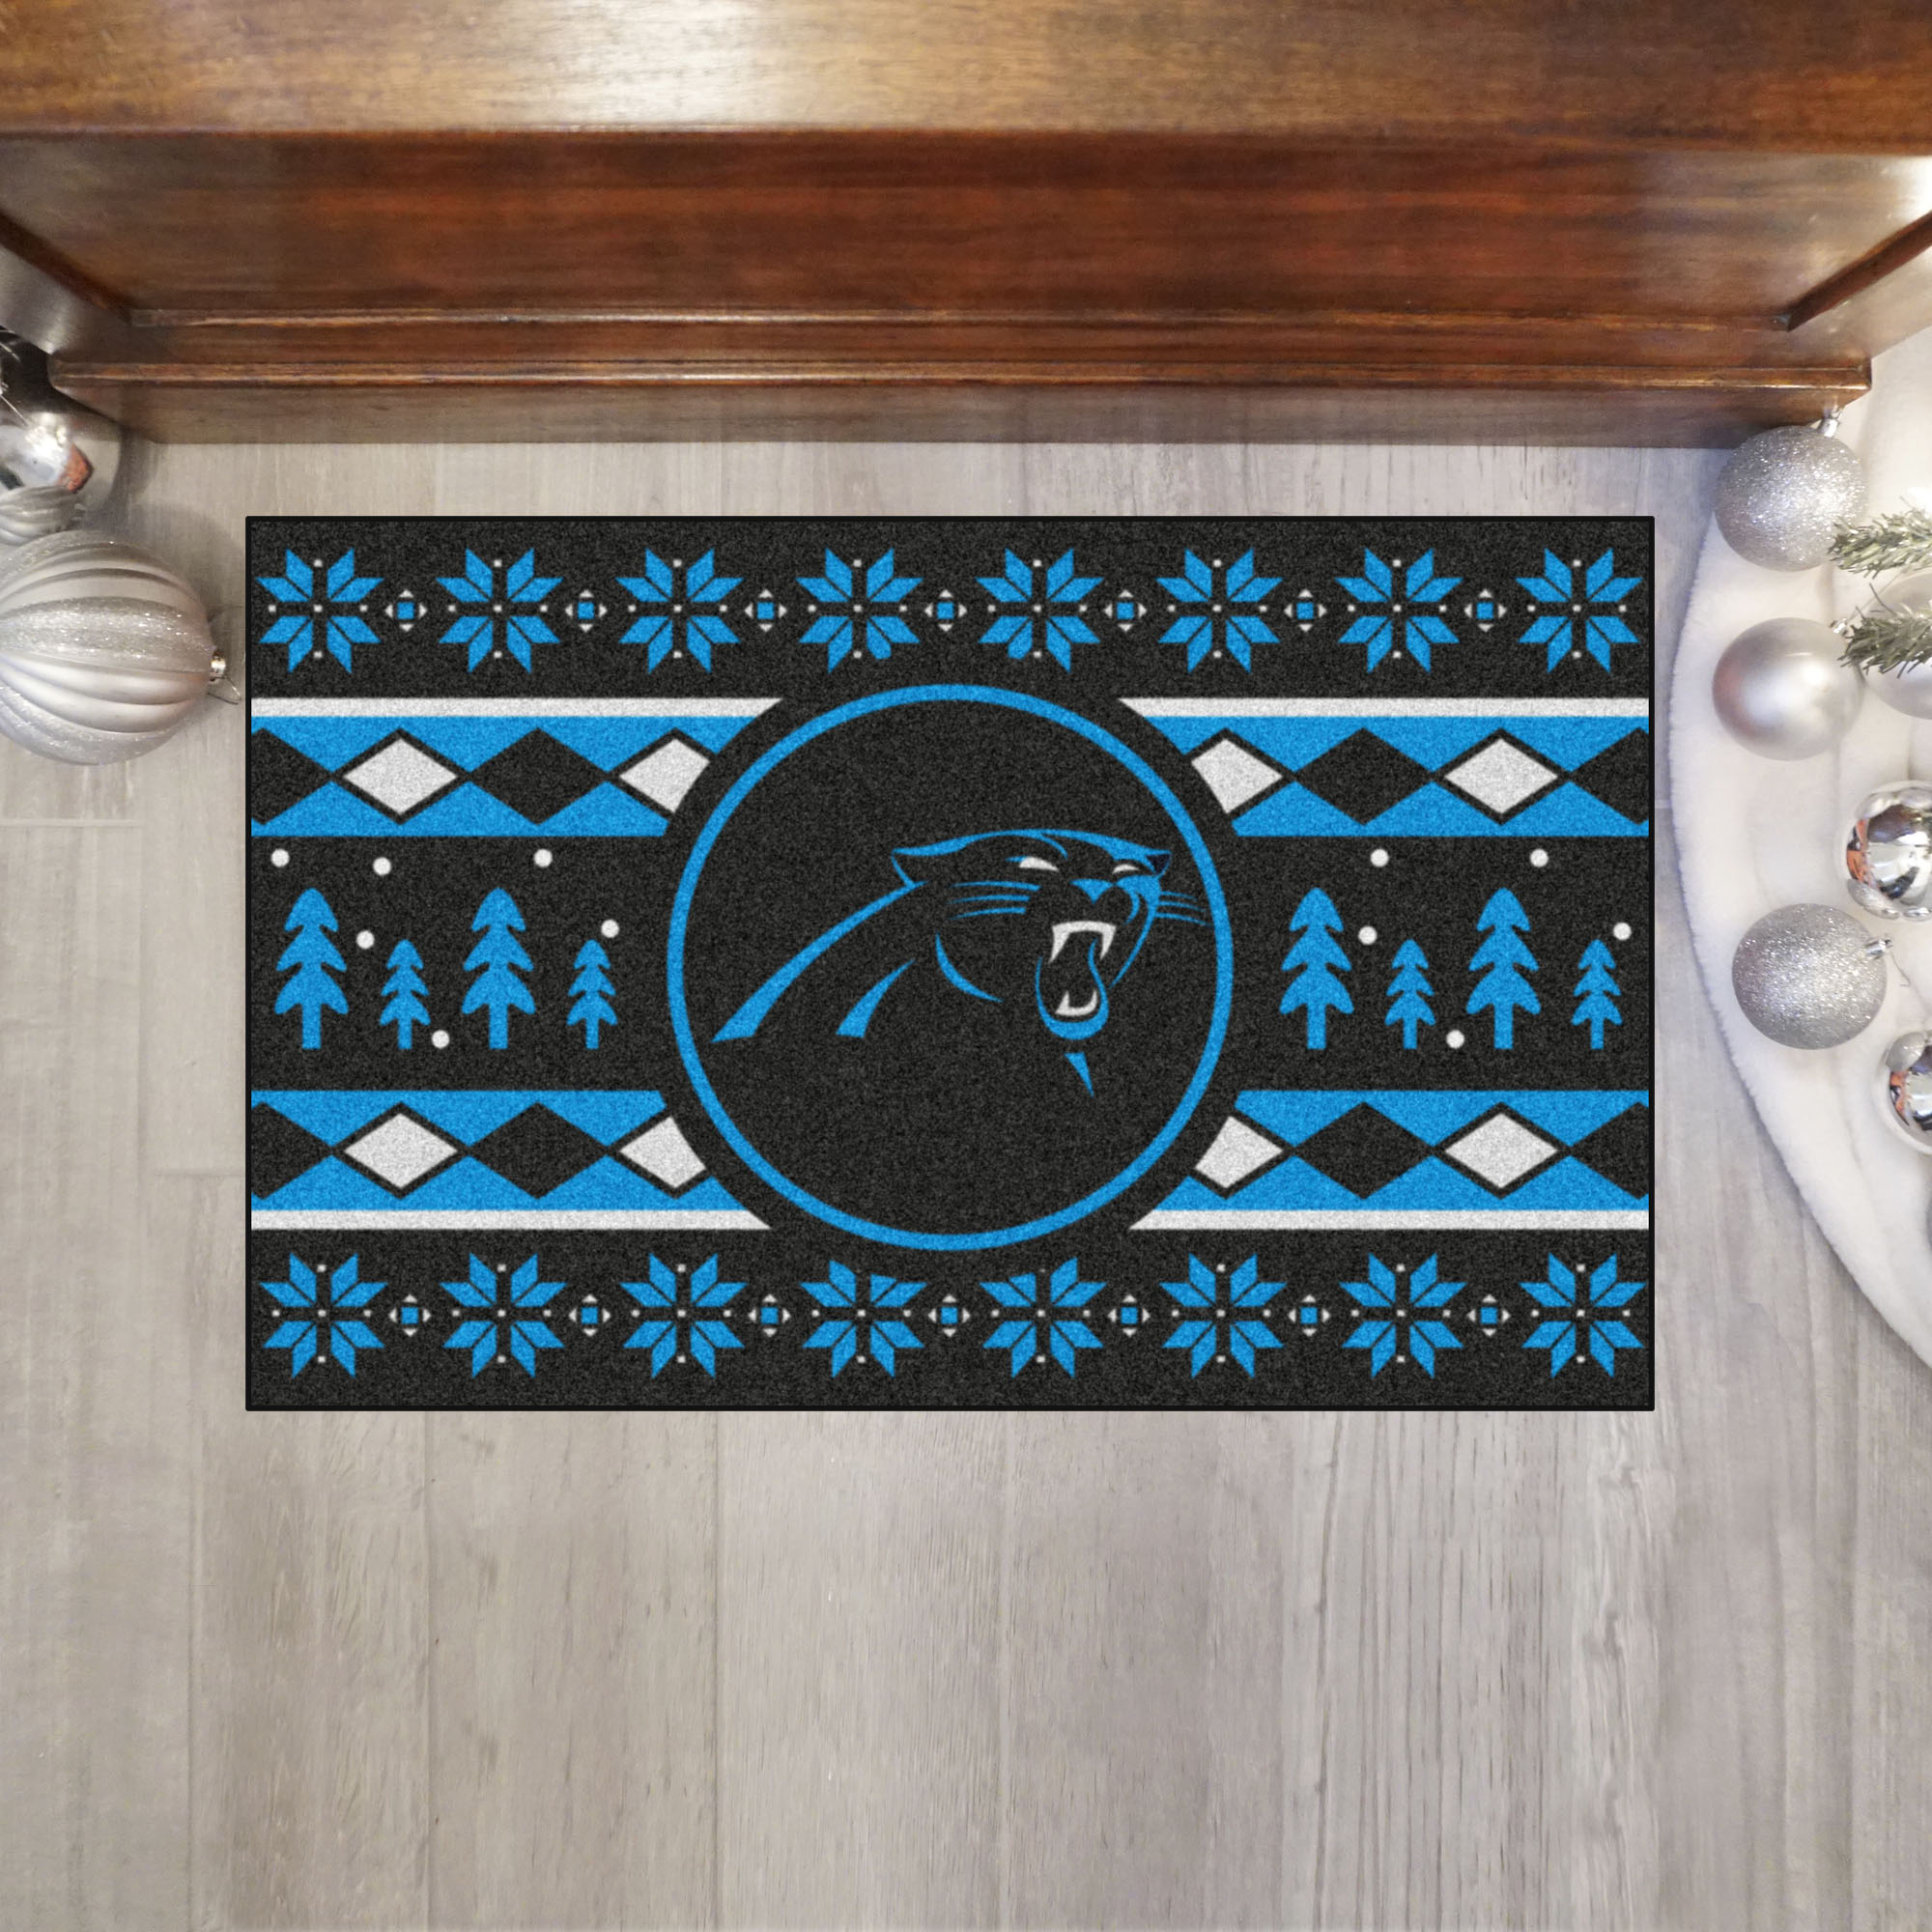 Panthers Holiday Sweater Starter Doormat - 19 x 30